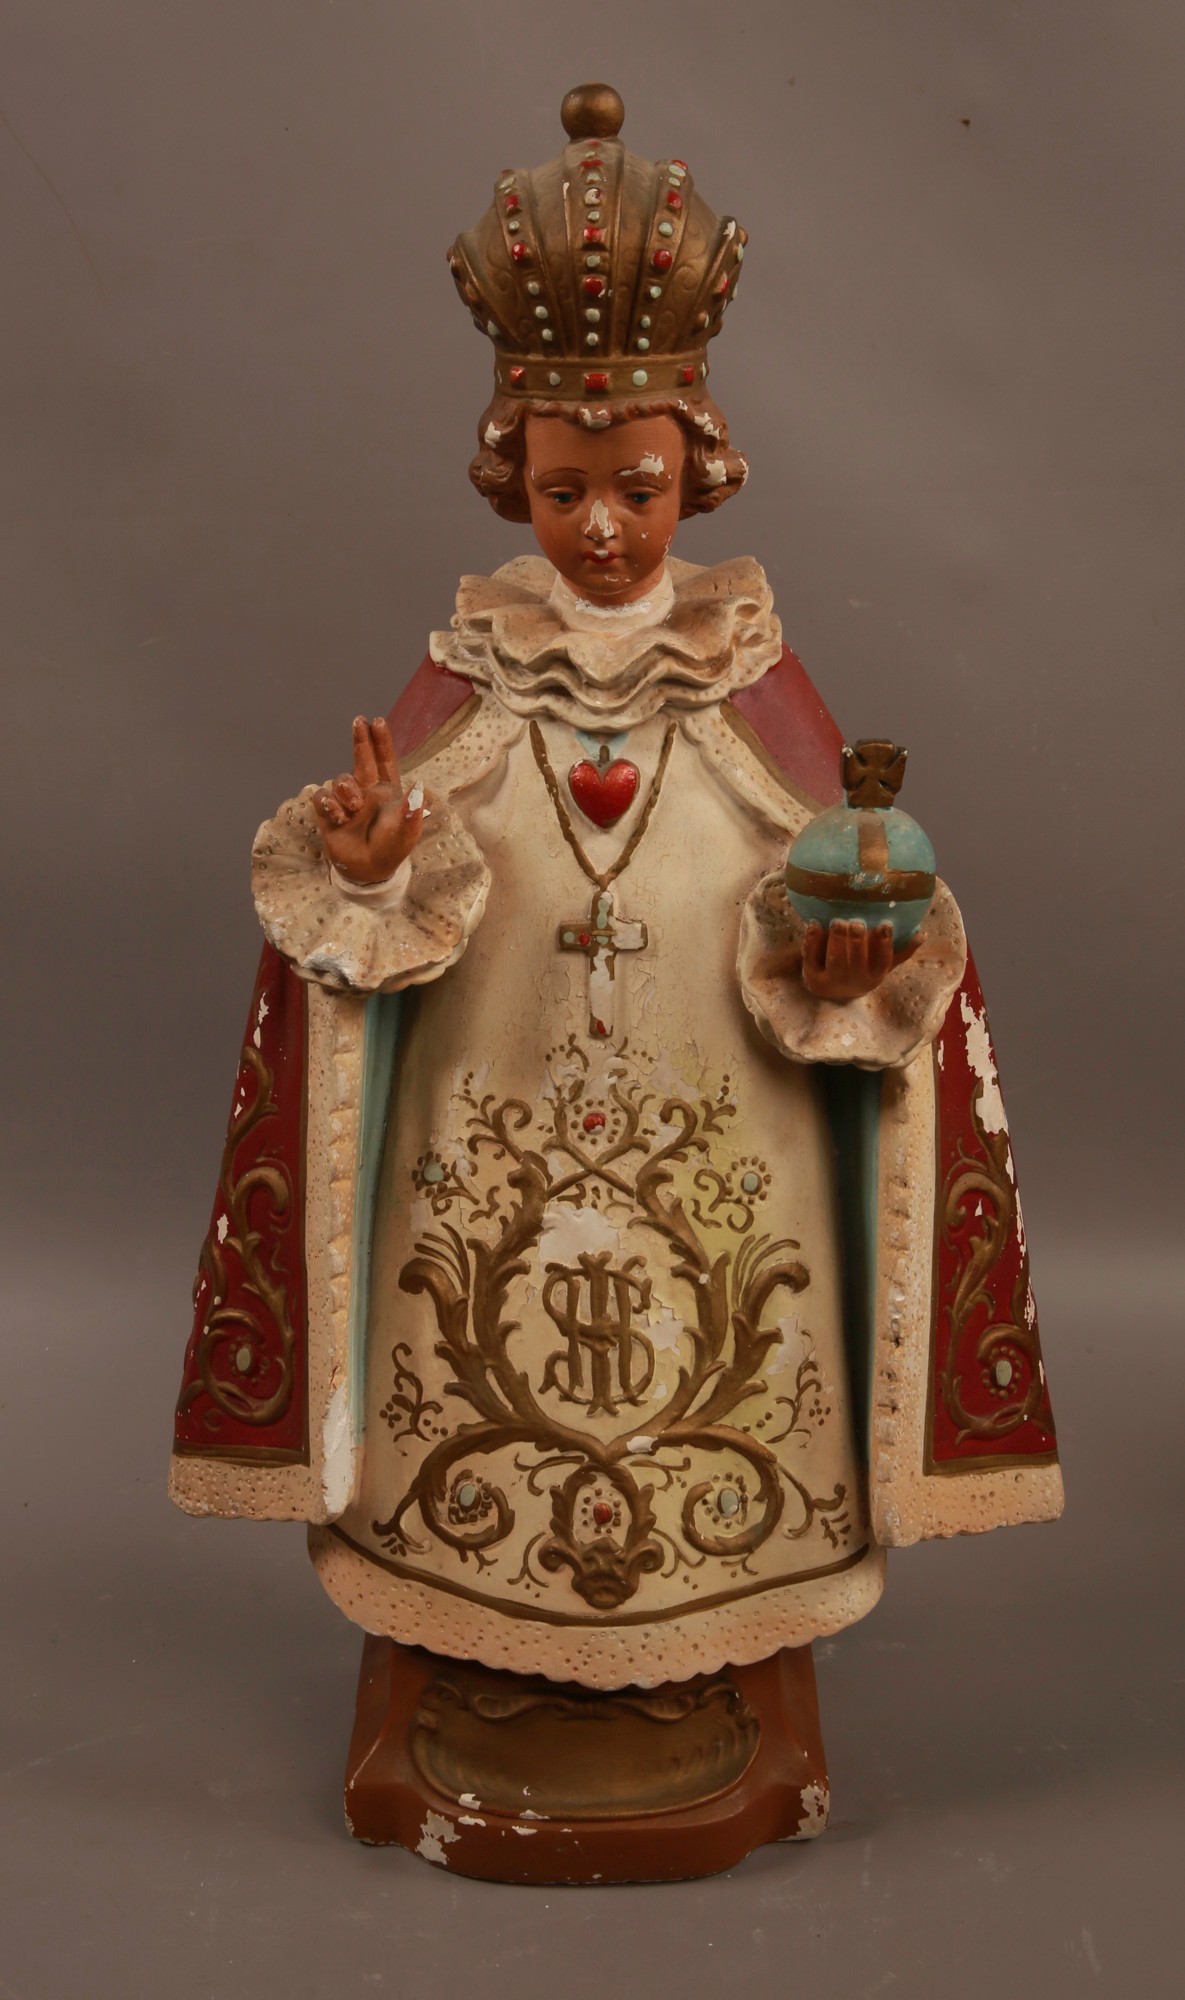 An Antique Large Religious Statue of the Child of Prague victorian 52cm Tall #80